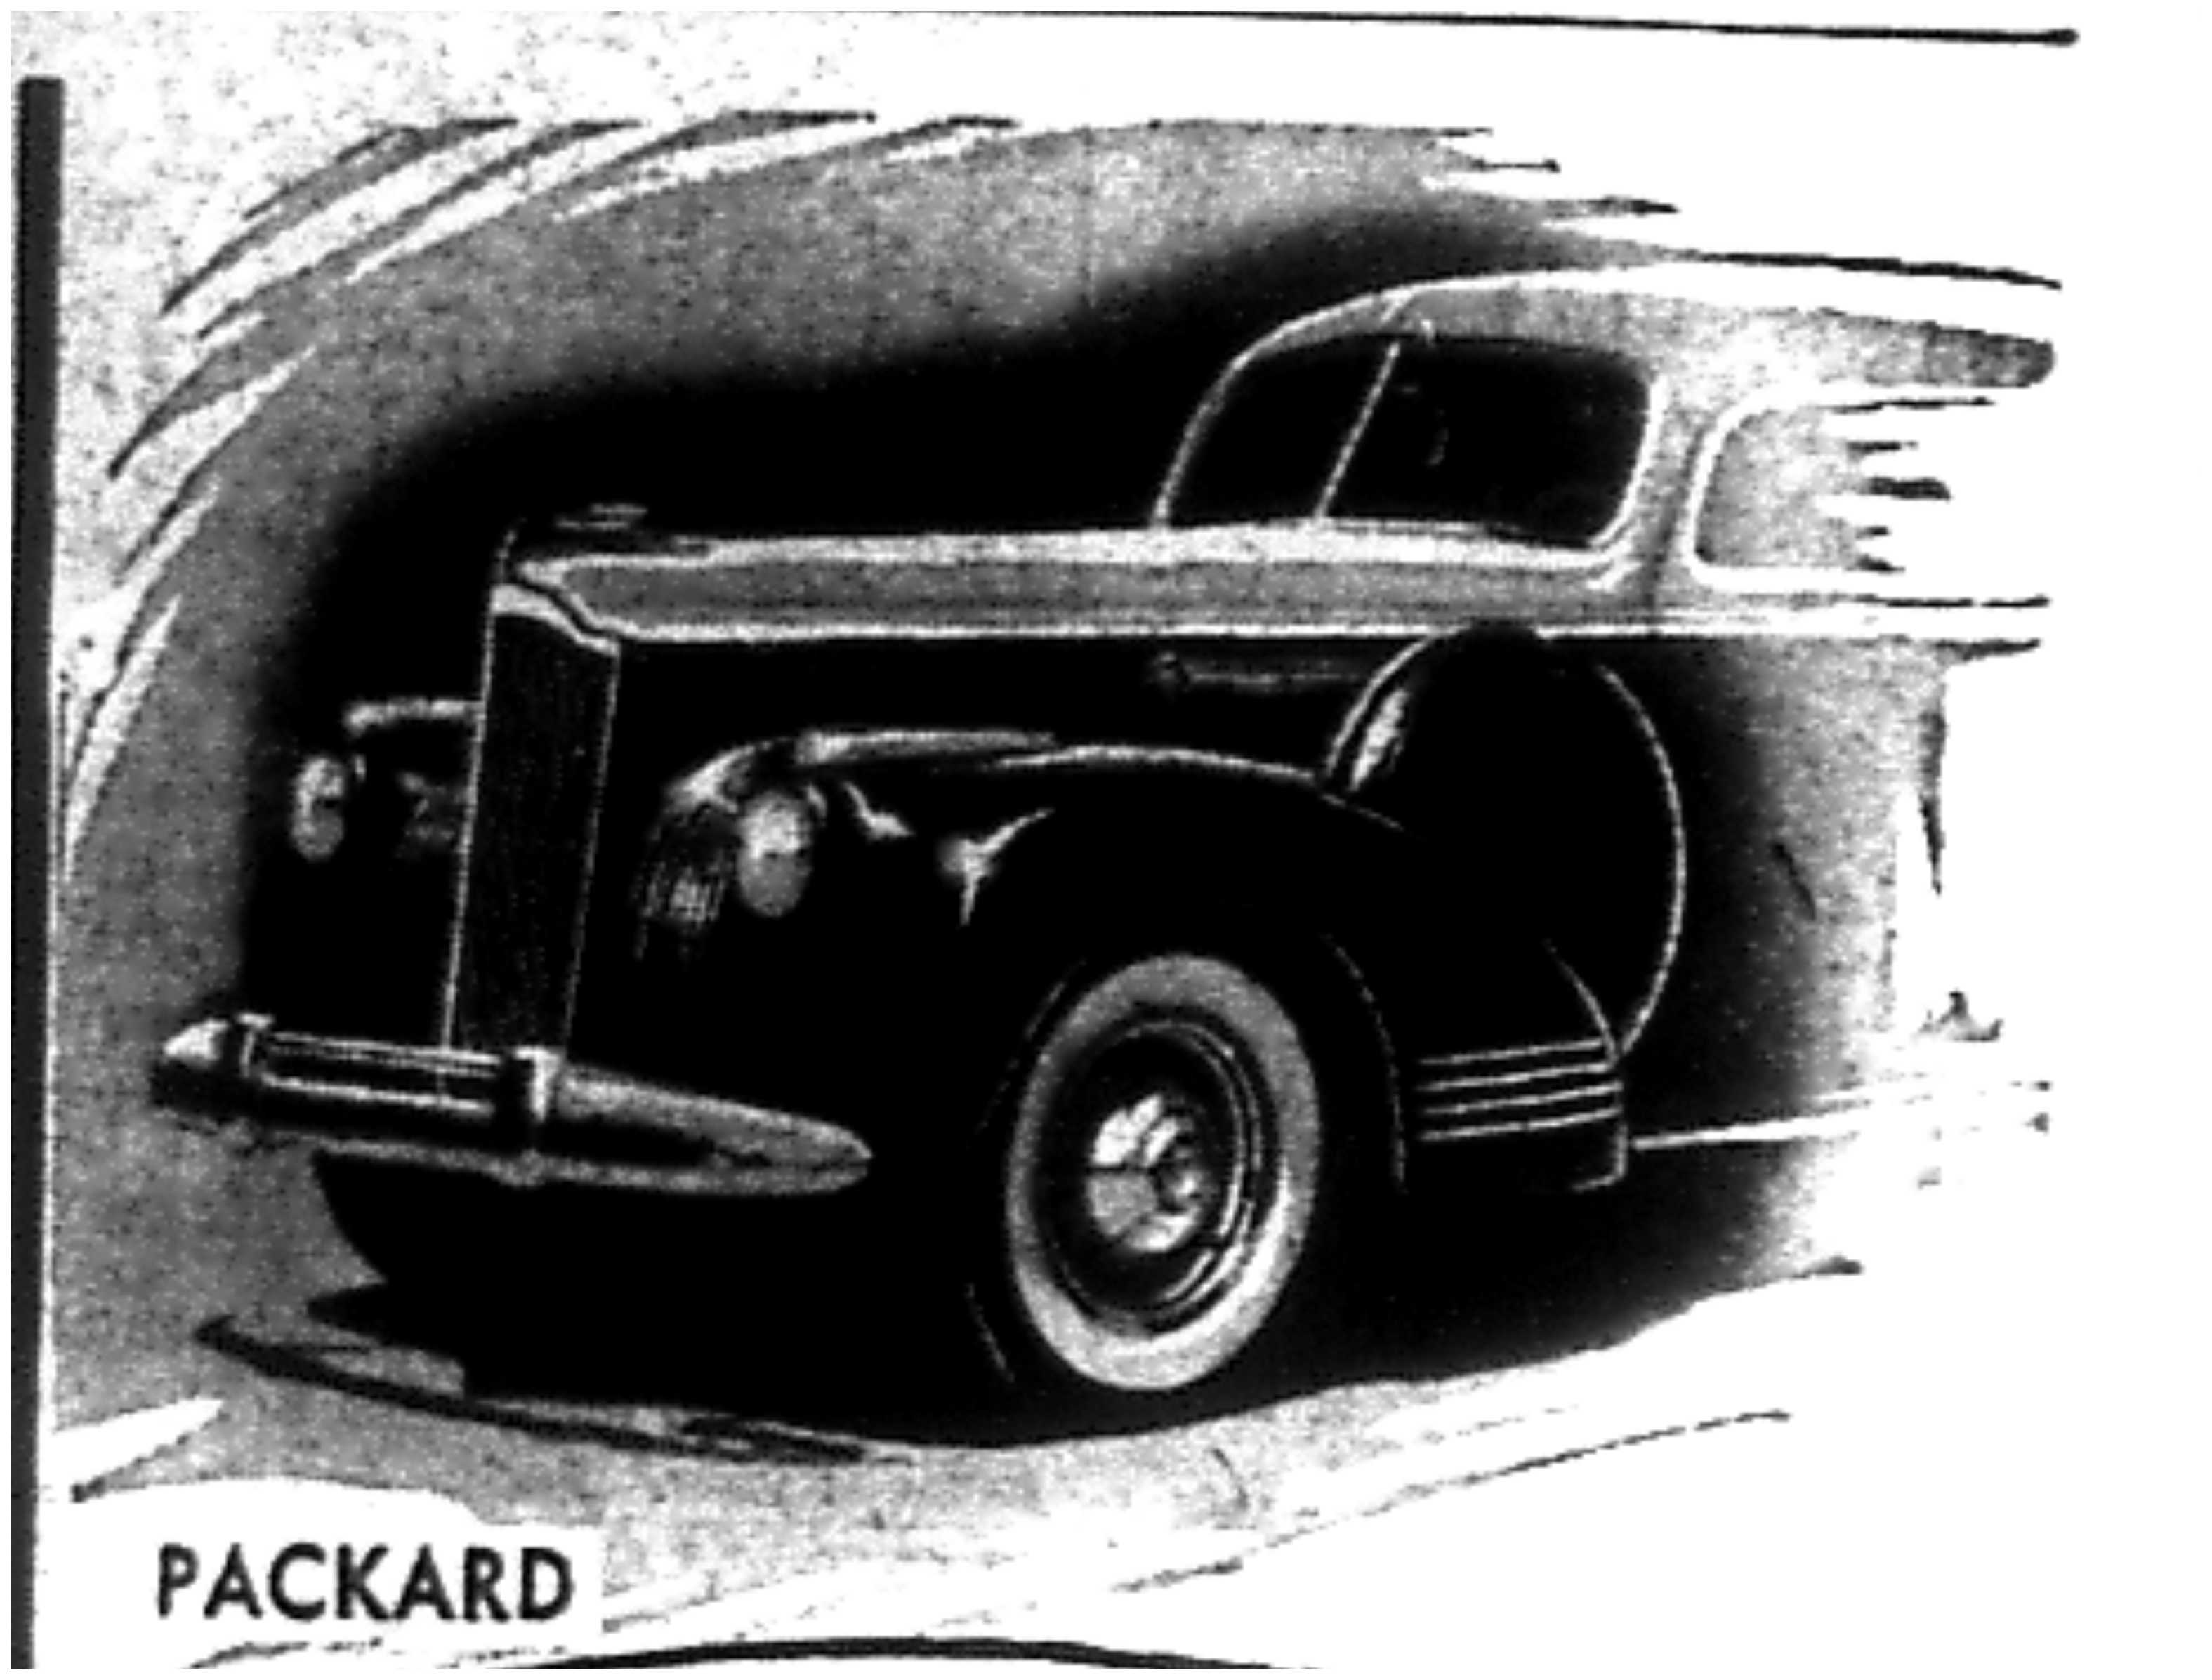 1941 Packard automobile